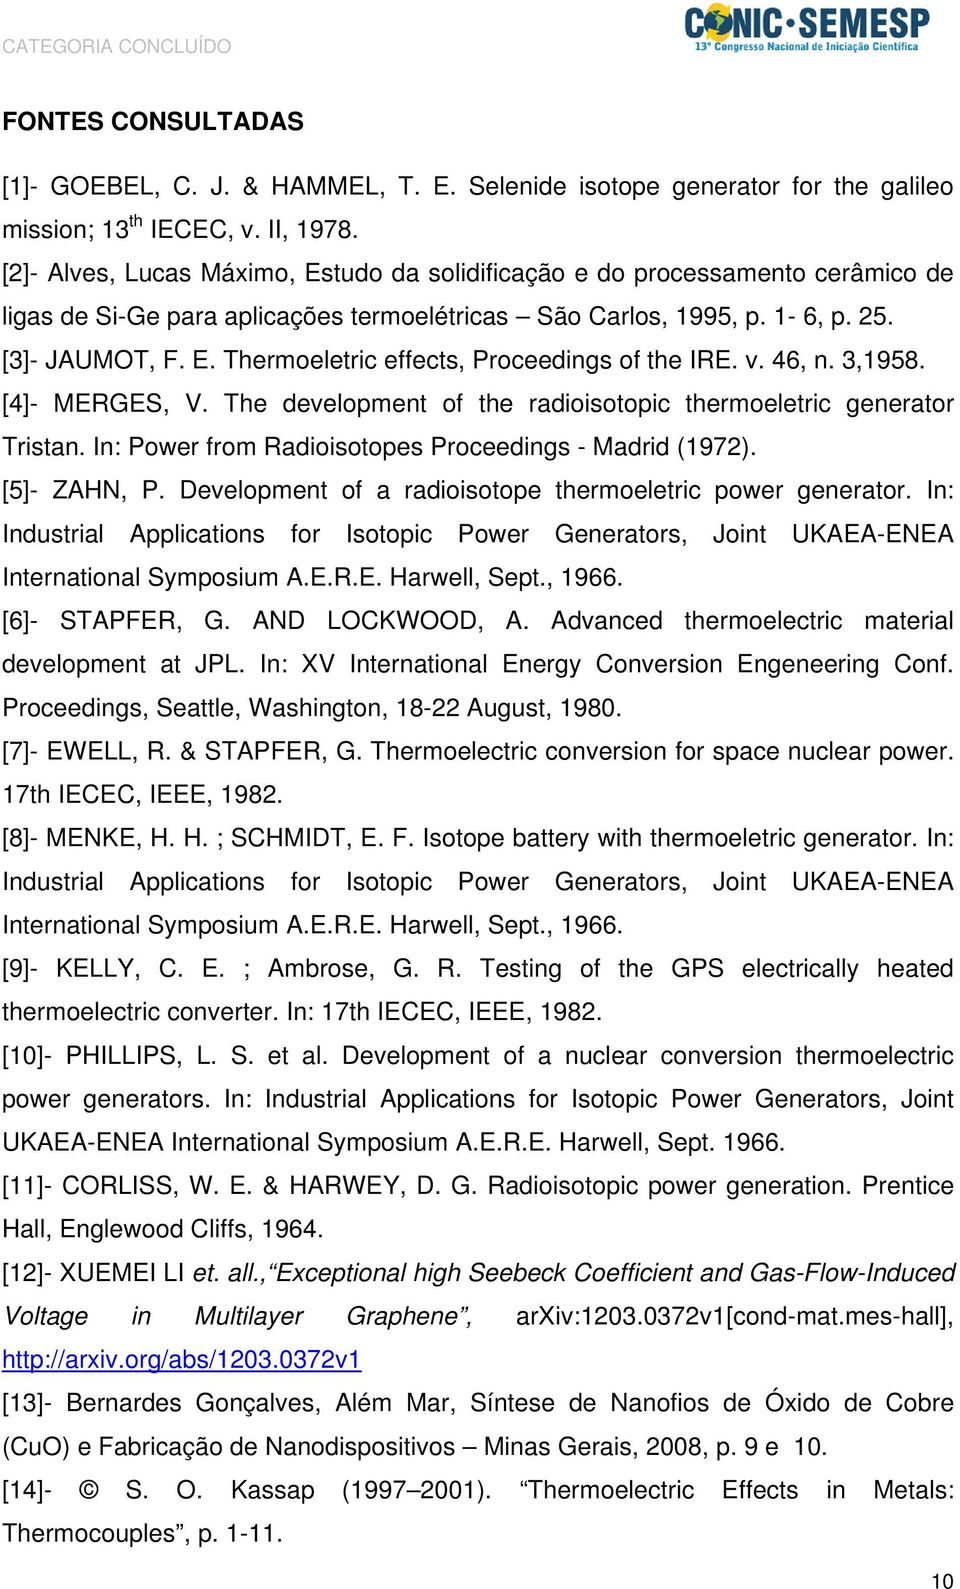 v. 46, n. 3,1958. [4]- MERGES, V. The development of the radioisotopic thermoeletric generator Tristan. In: Power from Radioisotopes Proceedings - Madrid (197). [5]- ZAHN, P.